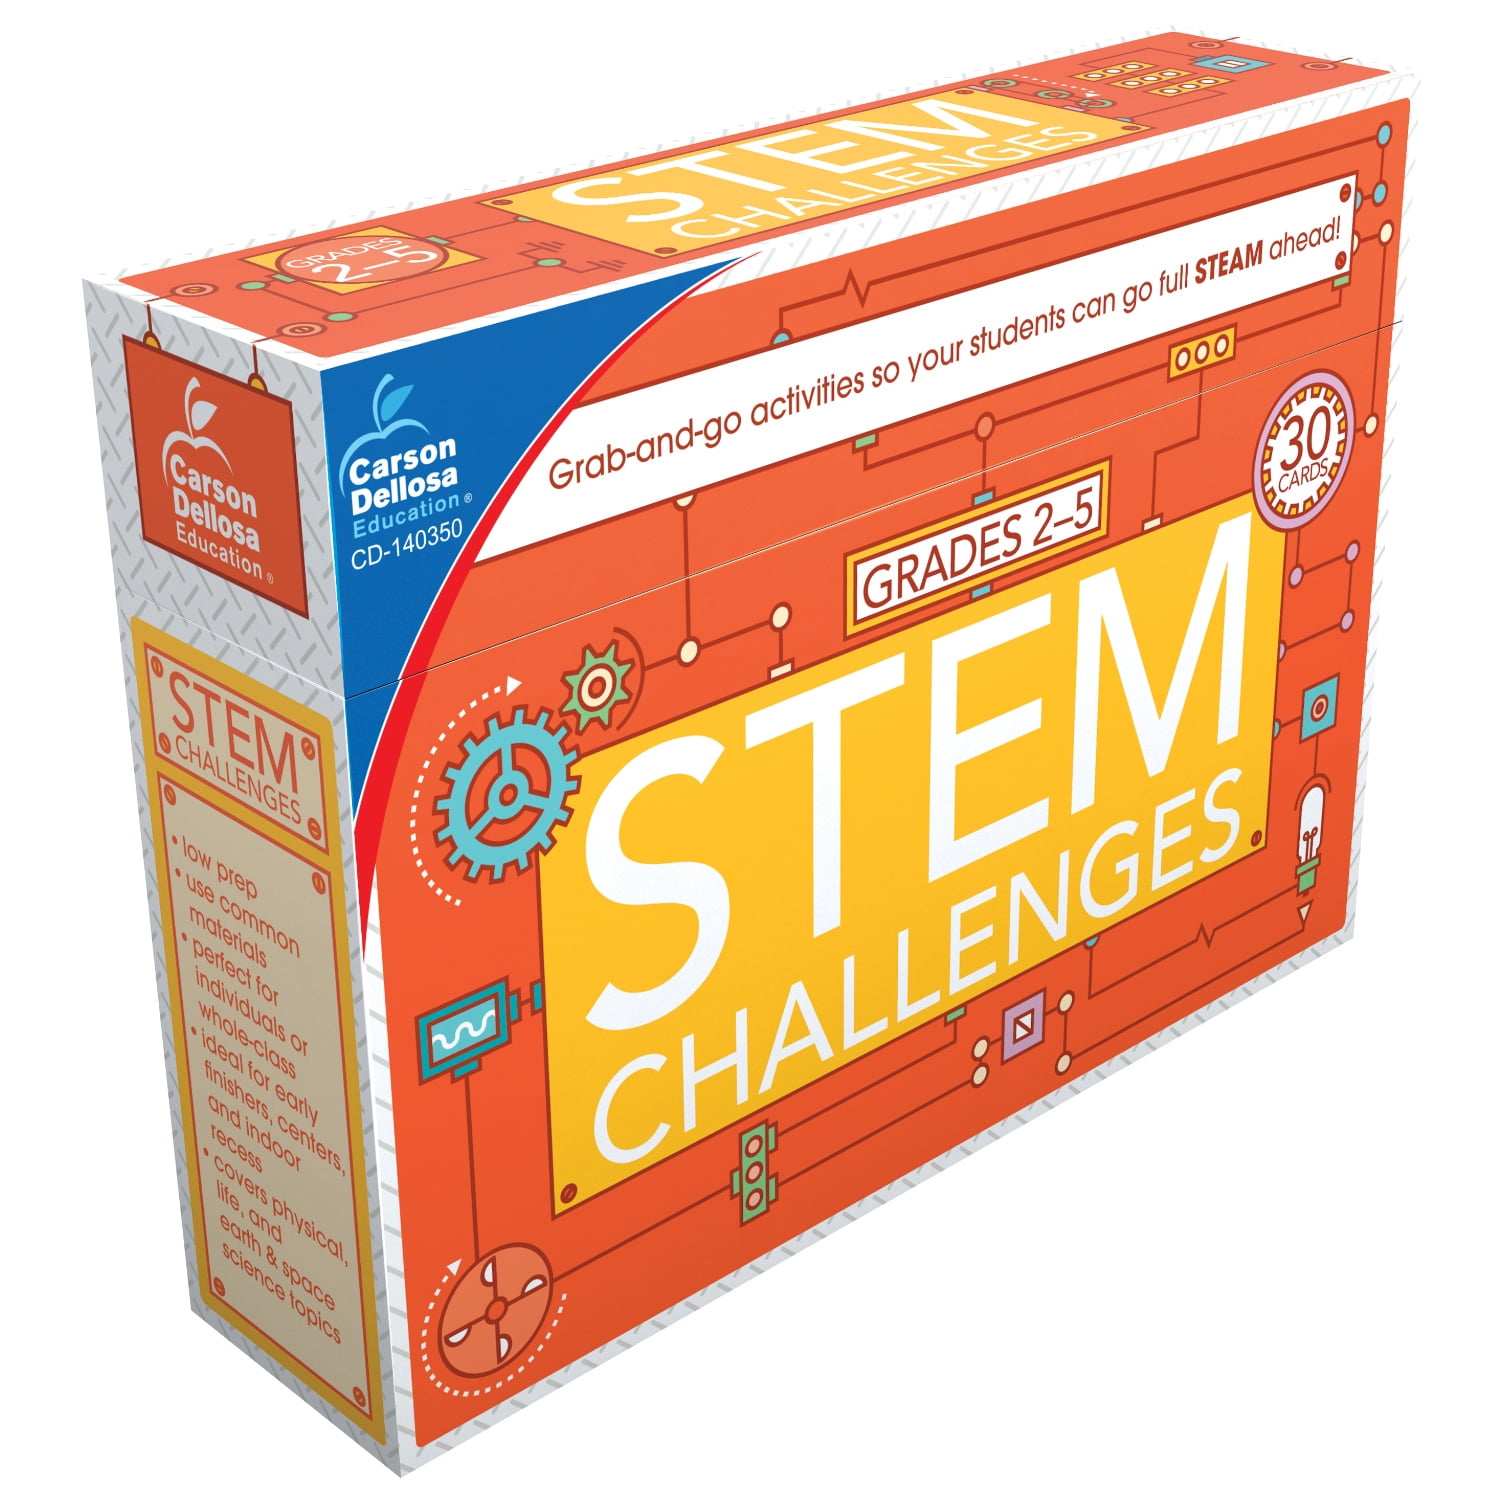 Carson Dellosa Education Stem Challenges Learning Cards 